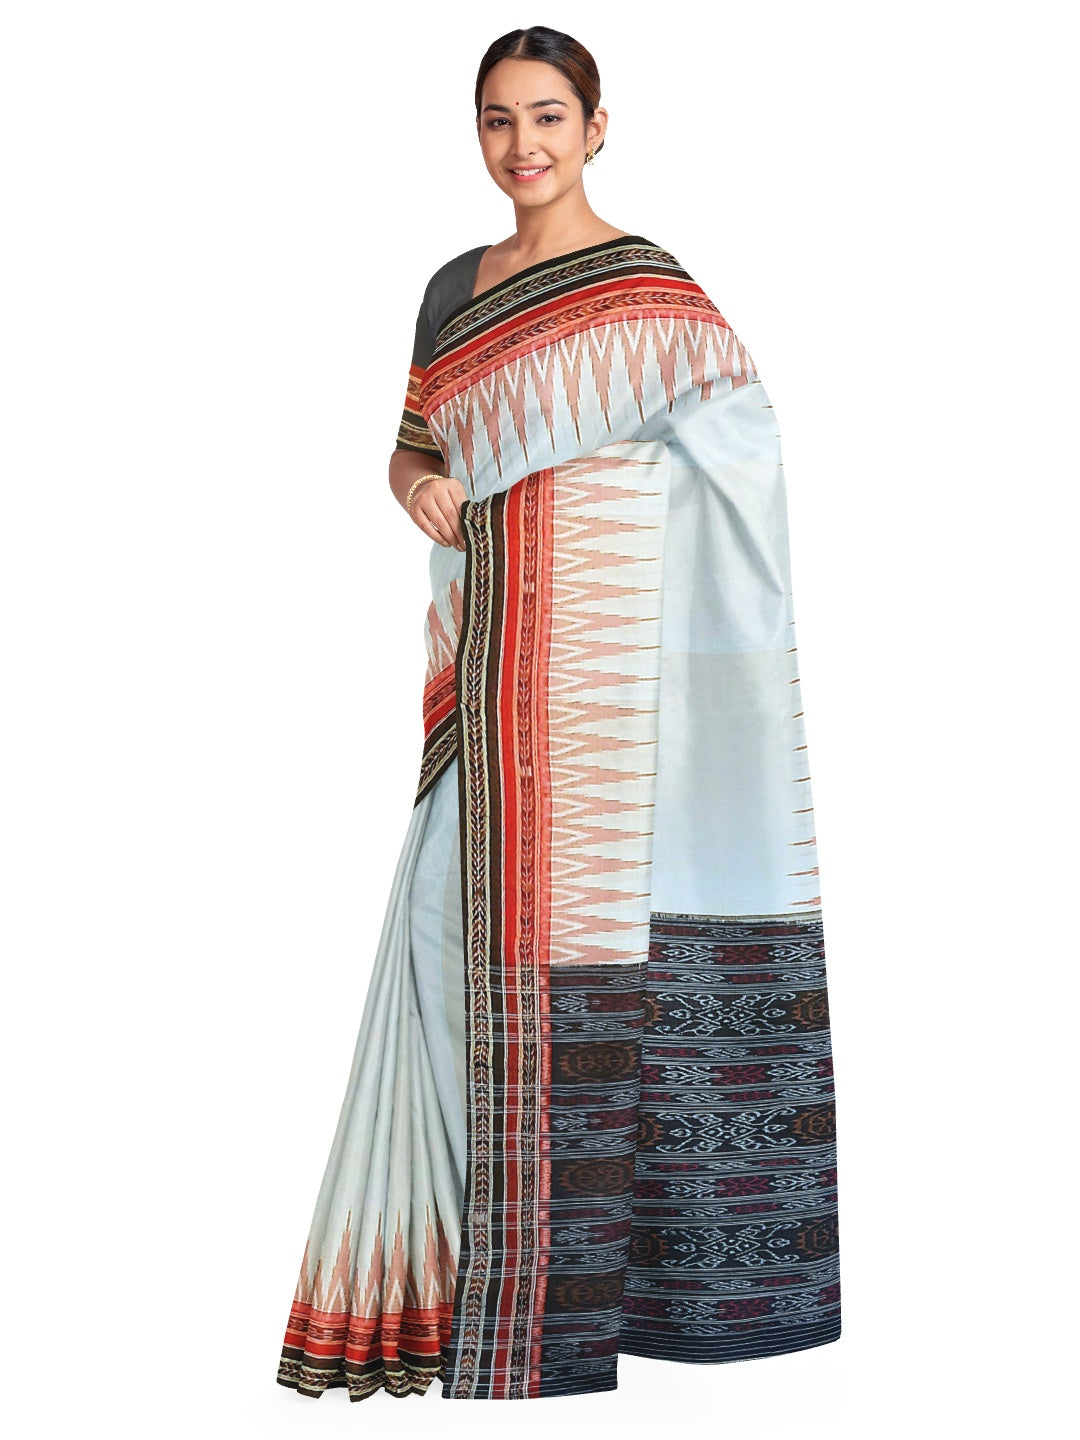 White double border Odisha Ikat saree with running blouse piece in black